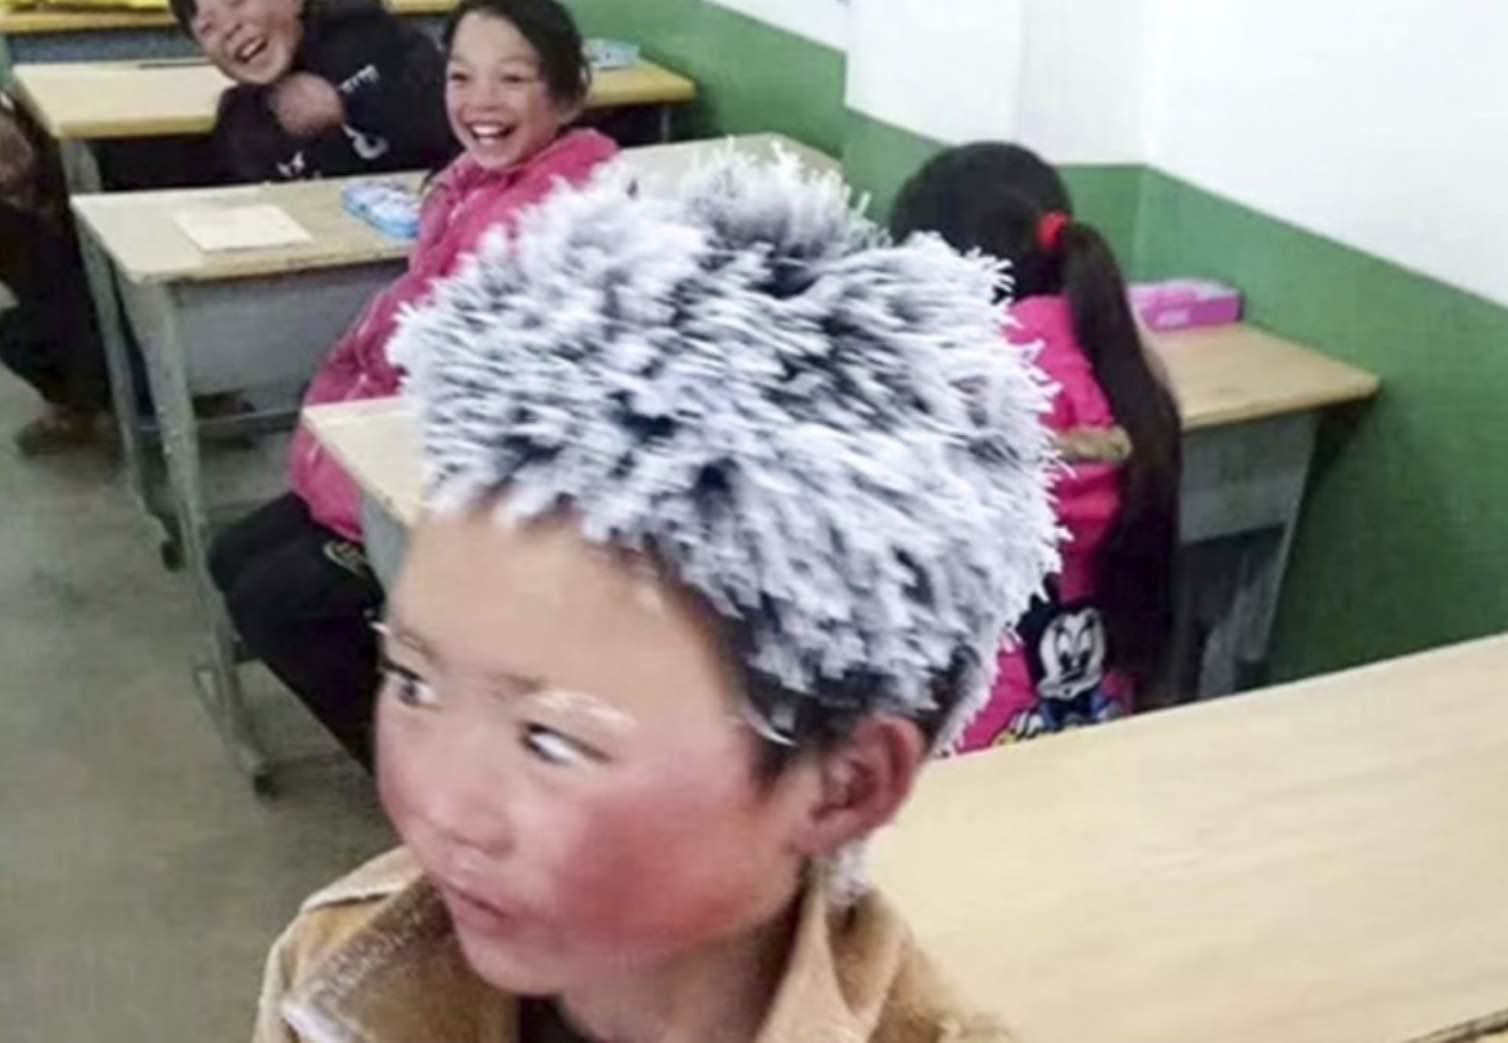 Boy's hair freezes on walk to school (Picture)